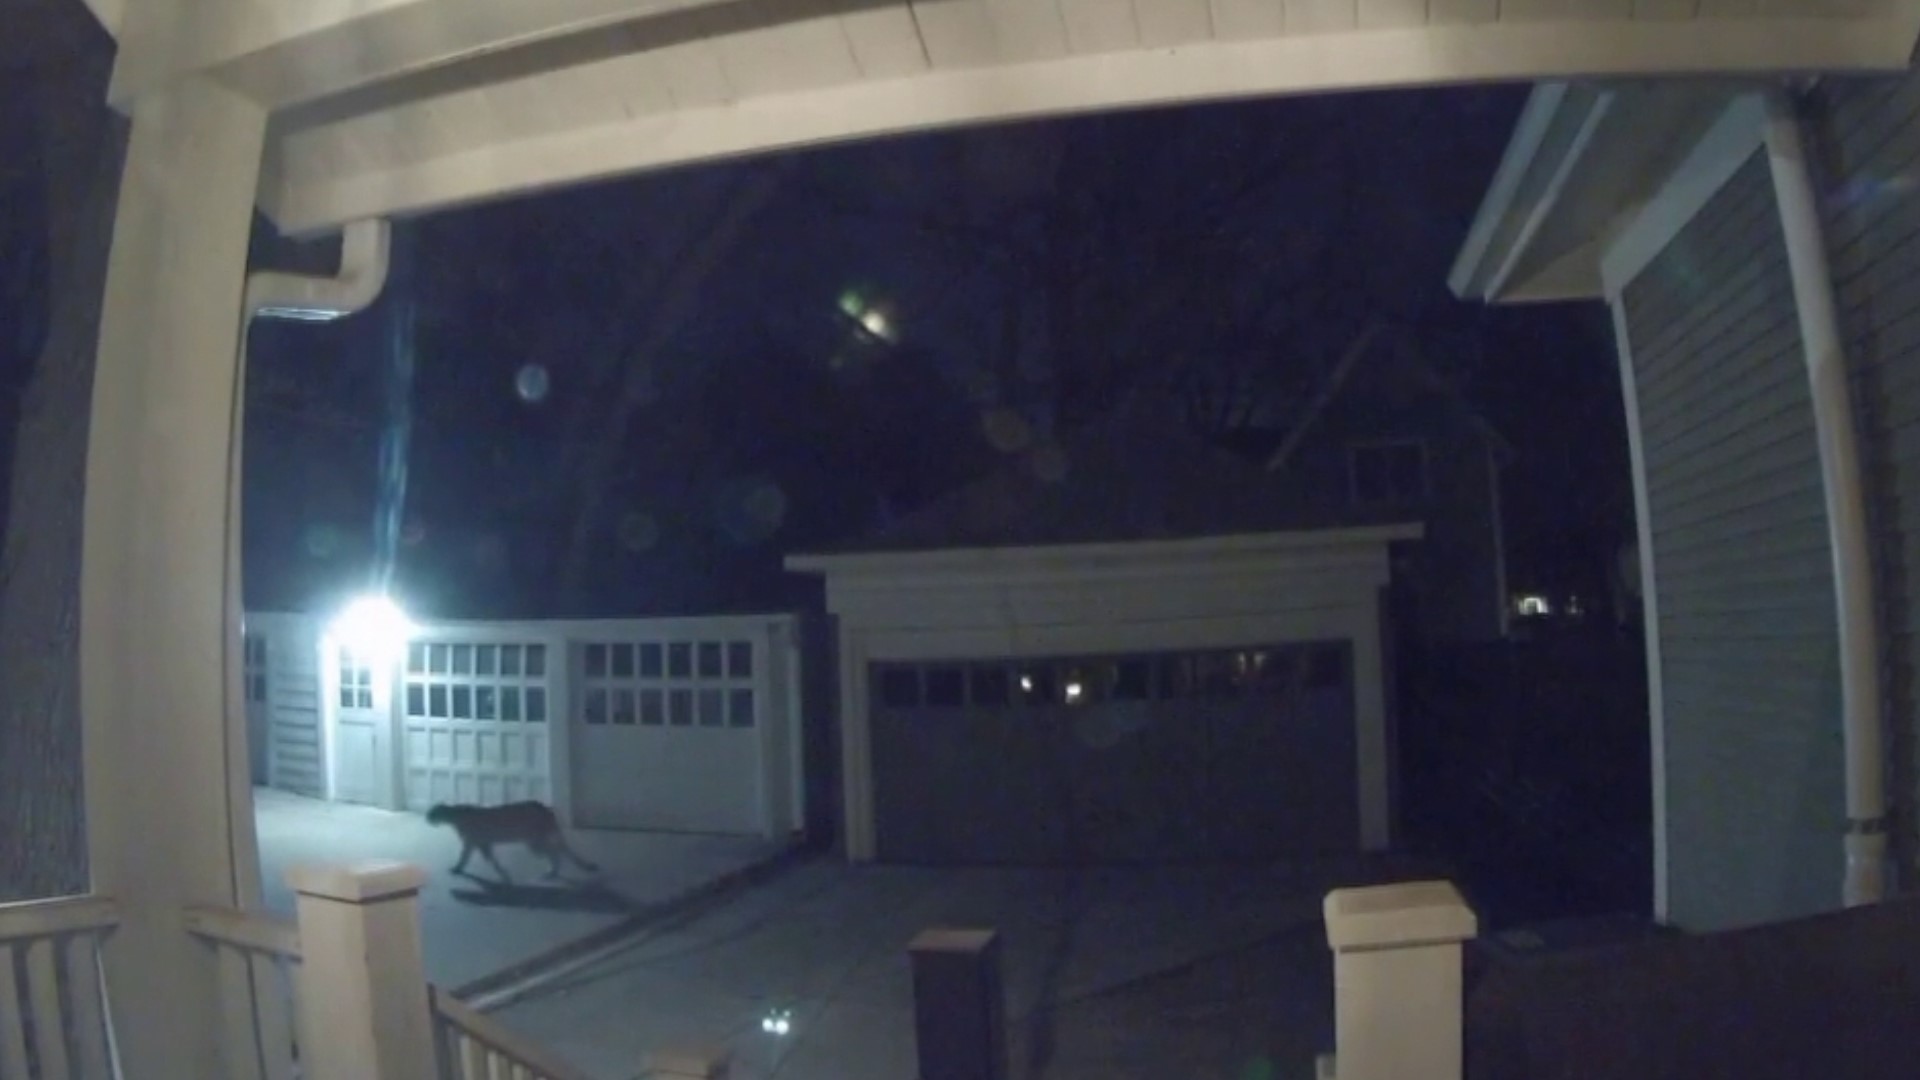 Home surveillance footage in Minneapolis' Lowry Hill neighborhood caught a cougar on the prowl early Monday morning.